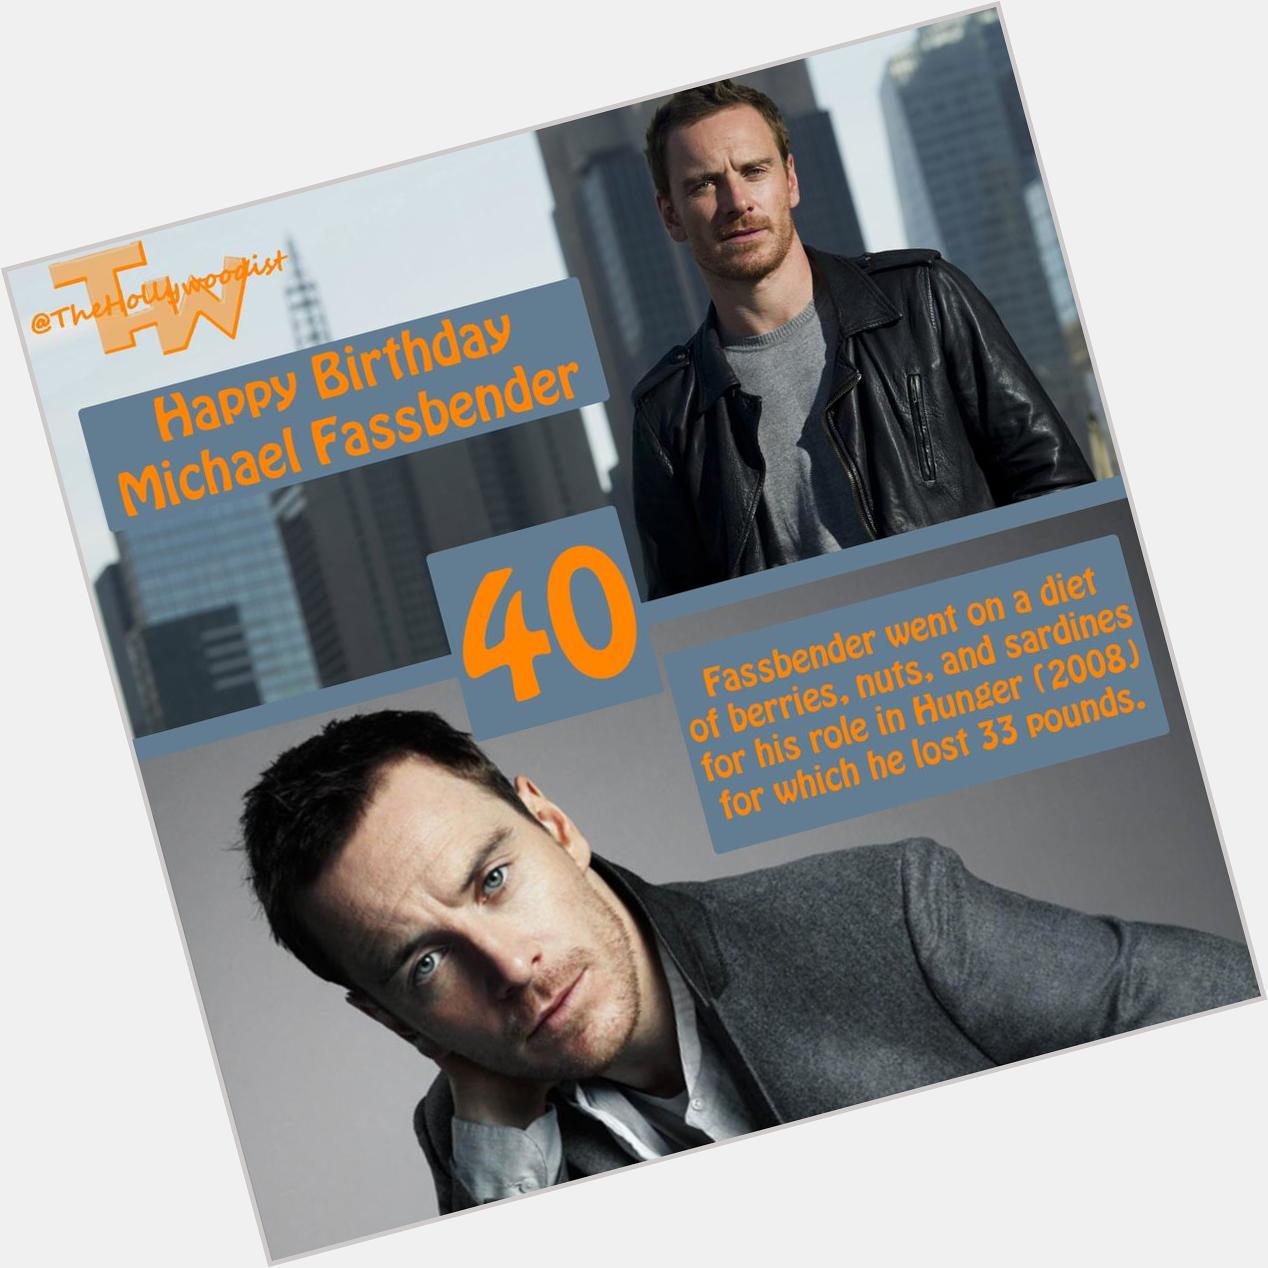 Happy Birthday Michael Fassbender.
What\s your favourite role of him? 